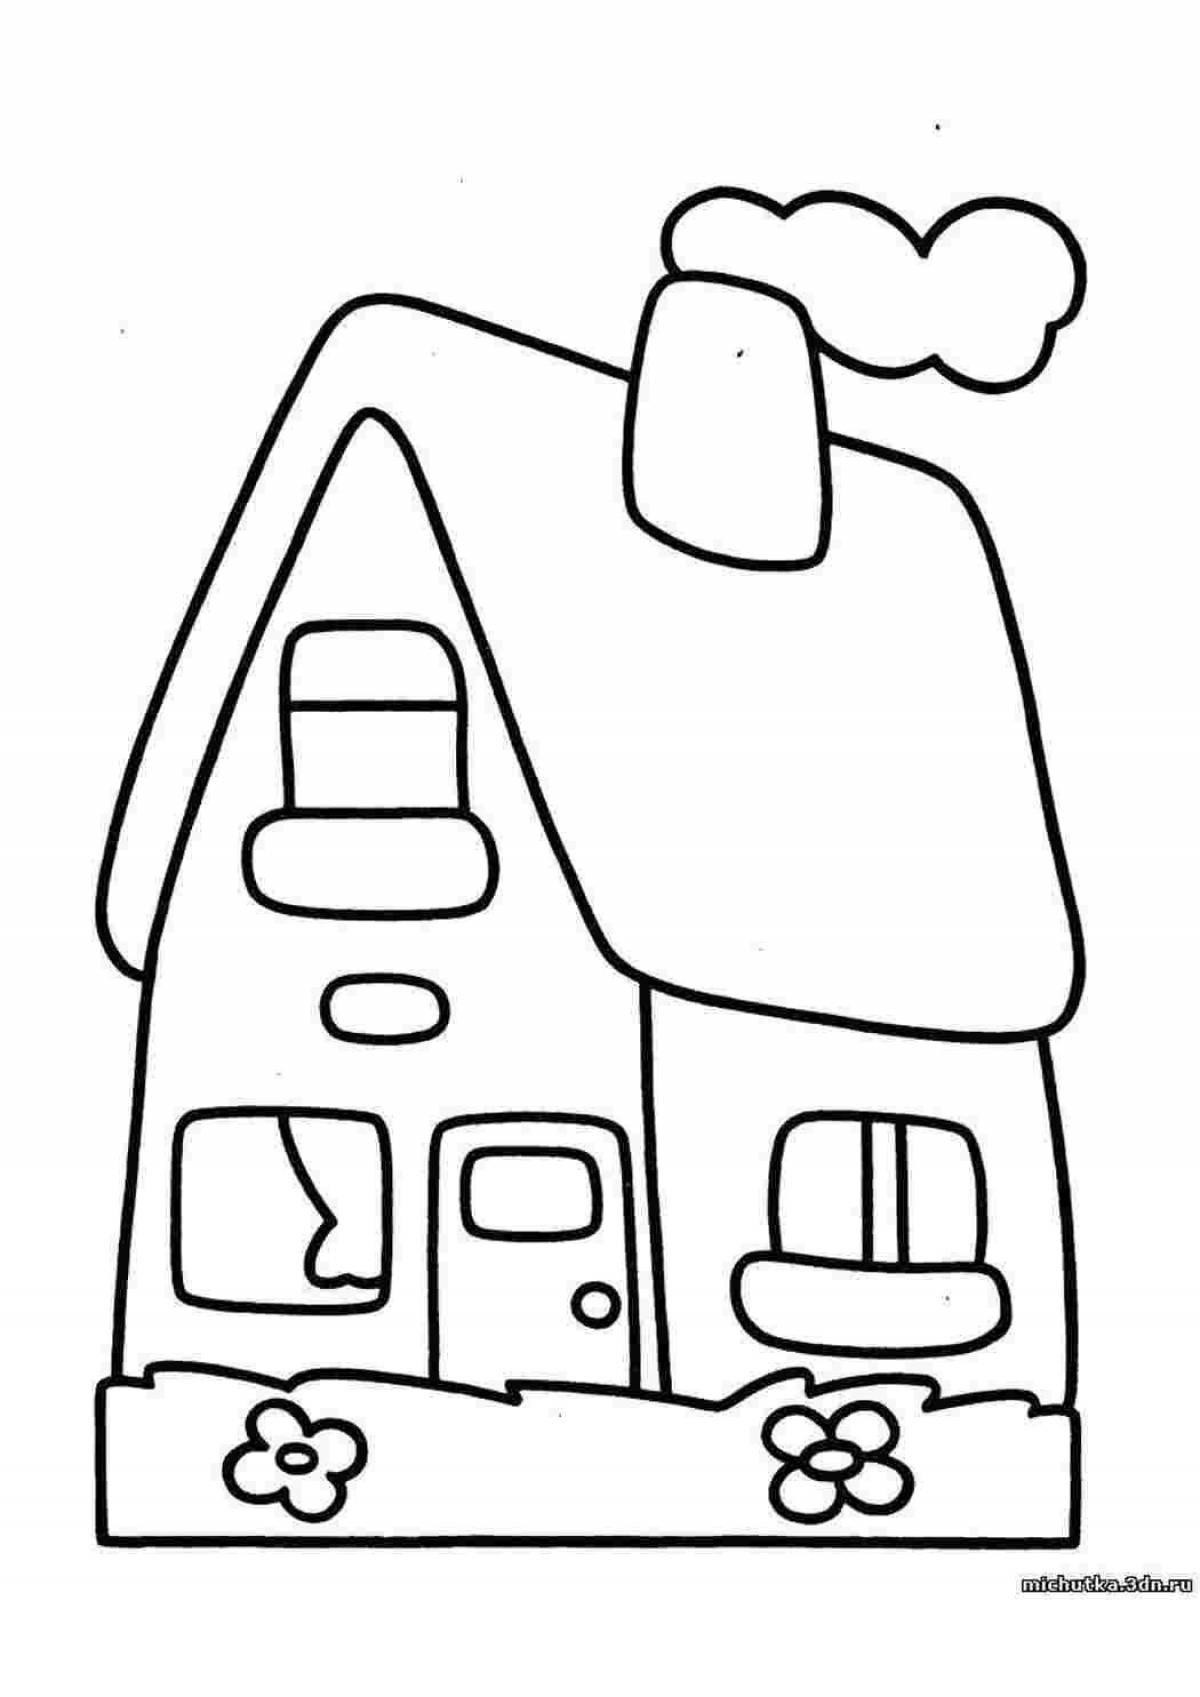 Fancy houses coloring book for 4-5 year olds